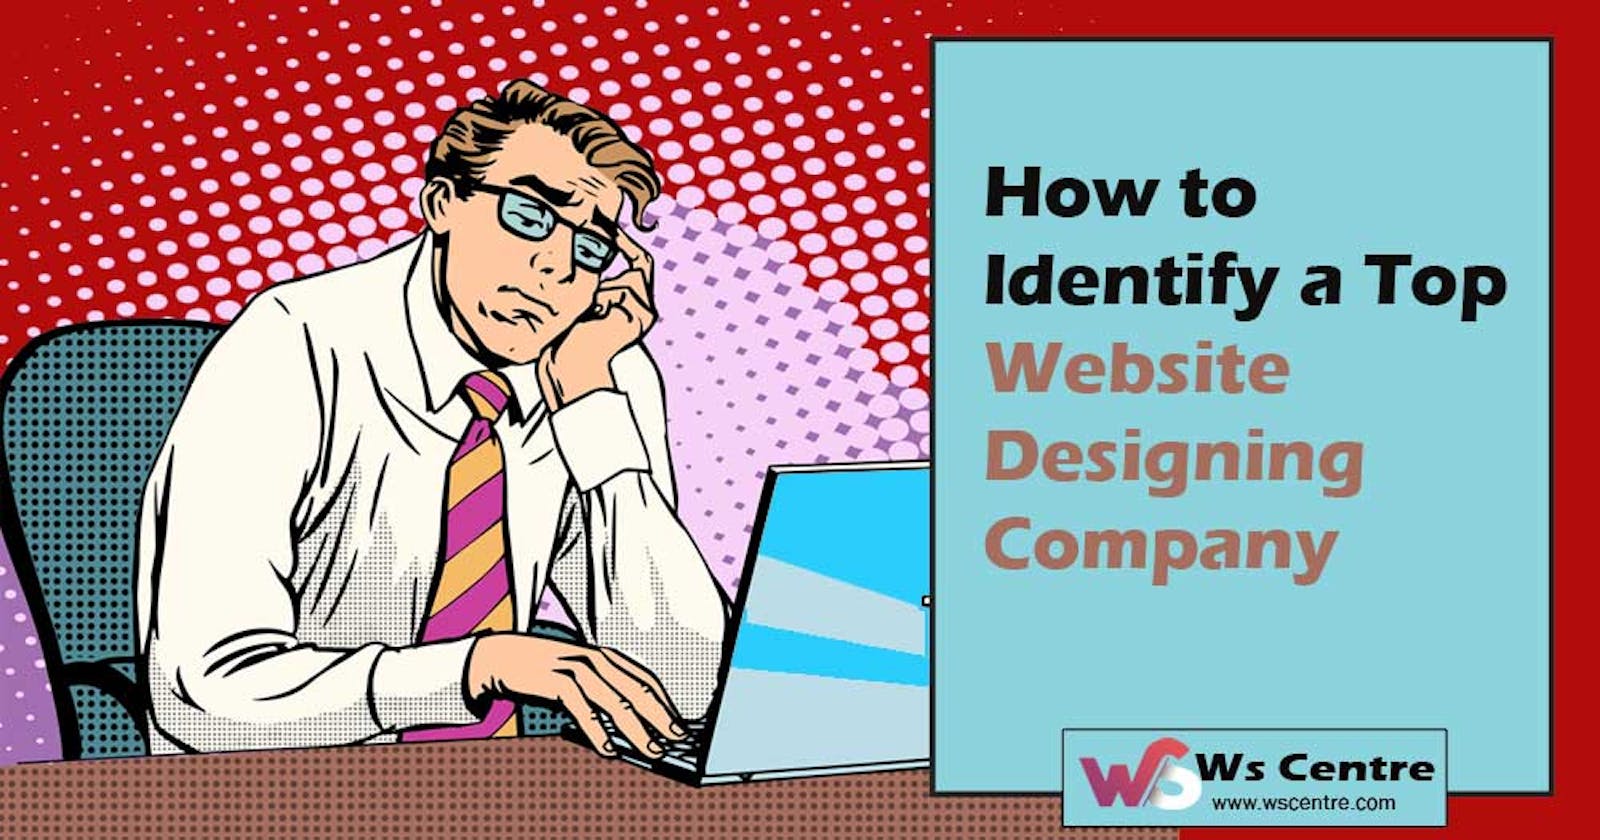 How to Identify a Top Website Designing Company